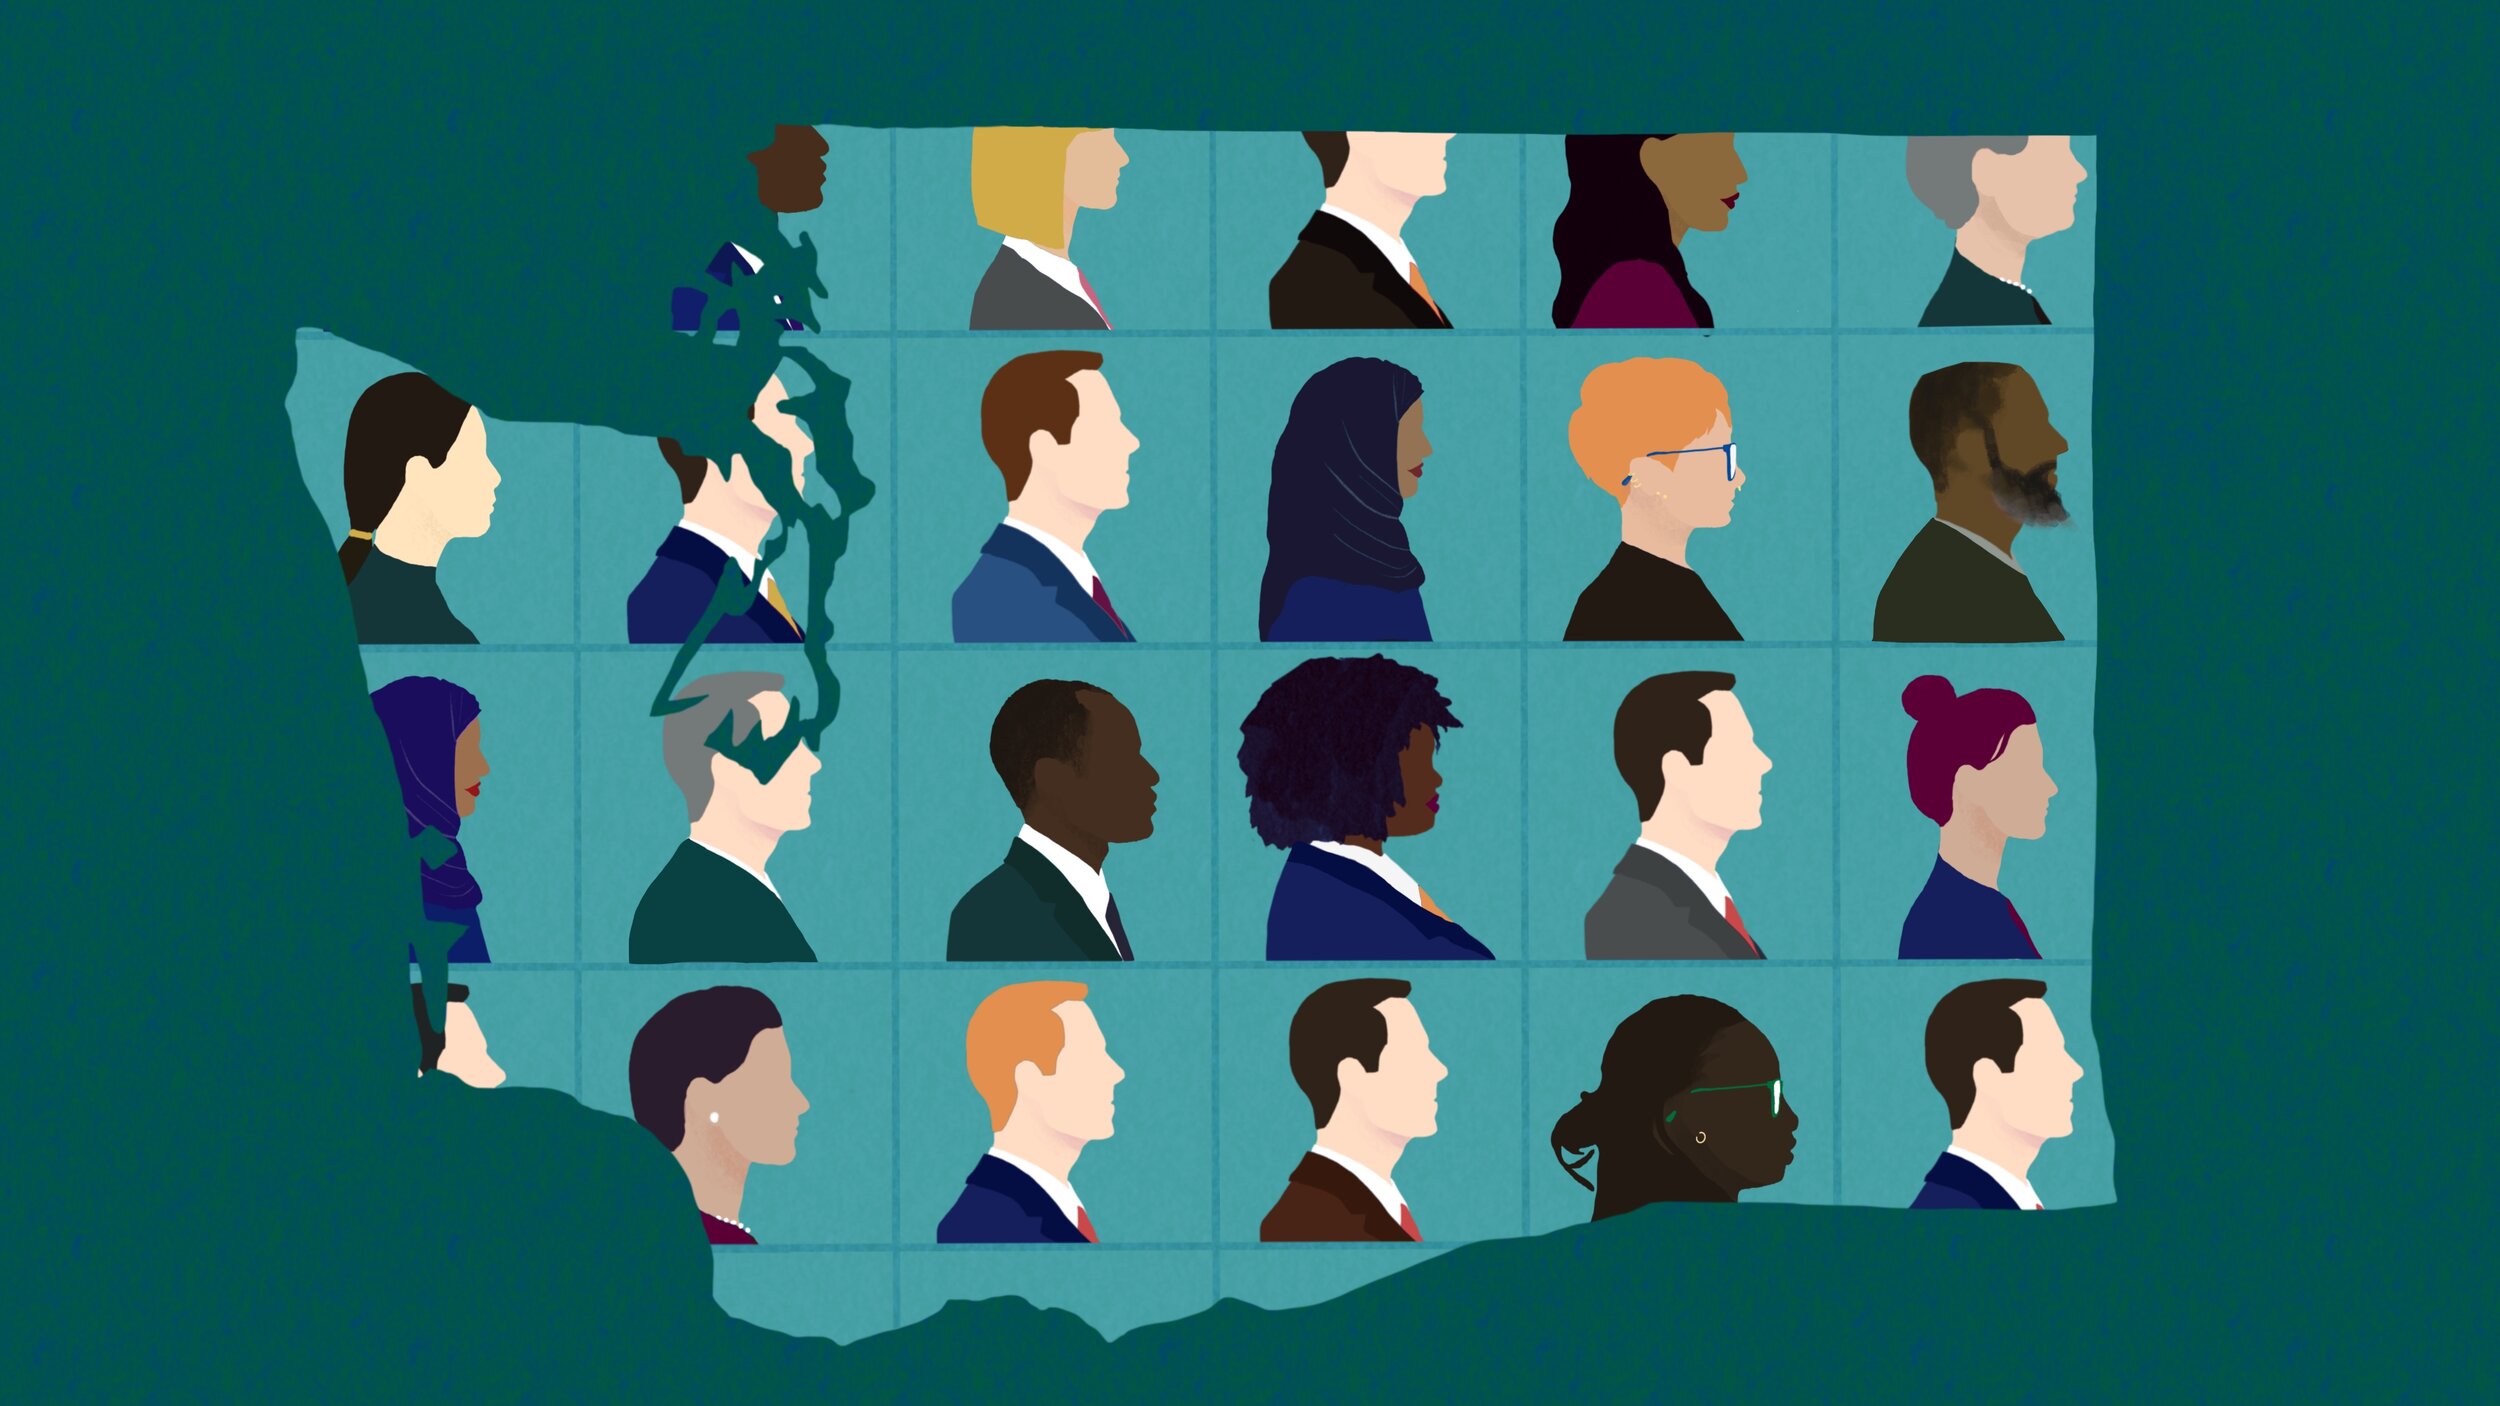 "Washington state politics is more diverse than ever" Crosscut opinion piece by Olgy Diaz 